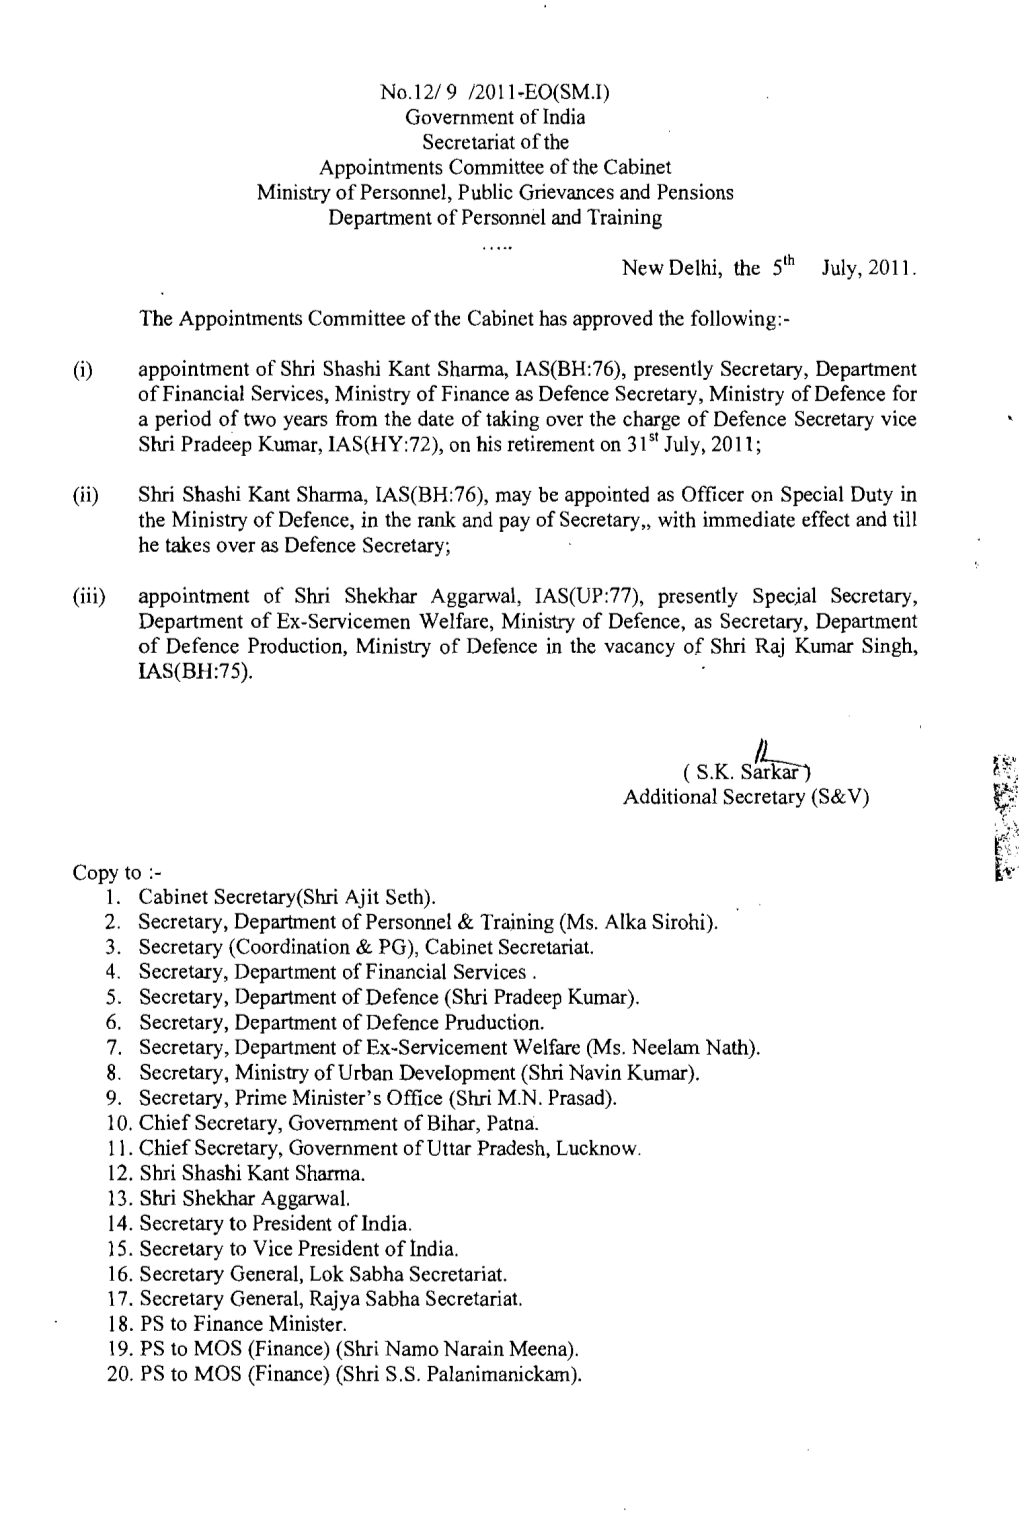 Govemment of India Secretariat of the Appointments Committee of the Cabinet Ministry of Personnel, Publi